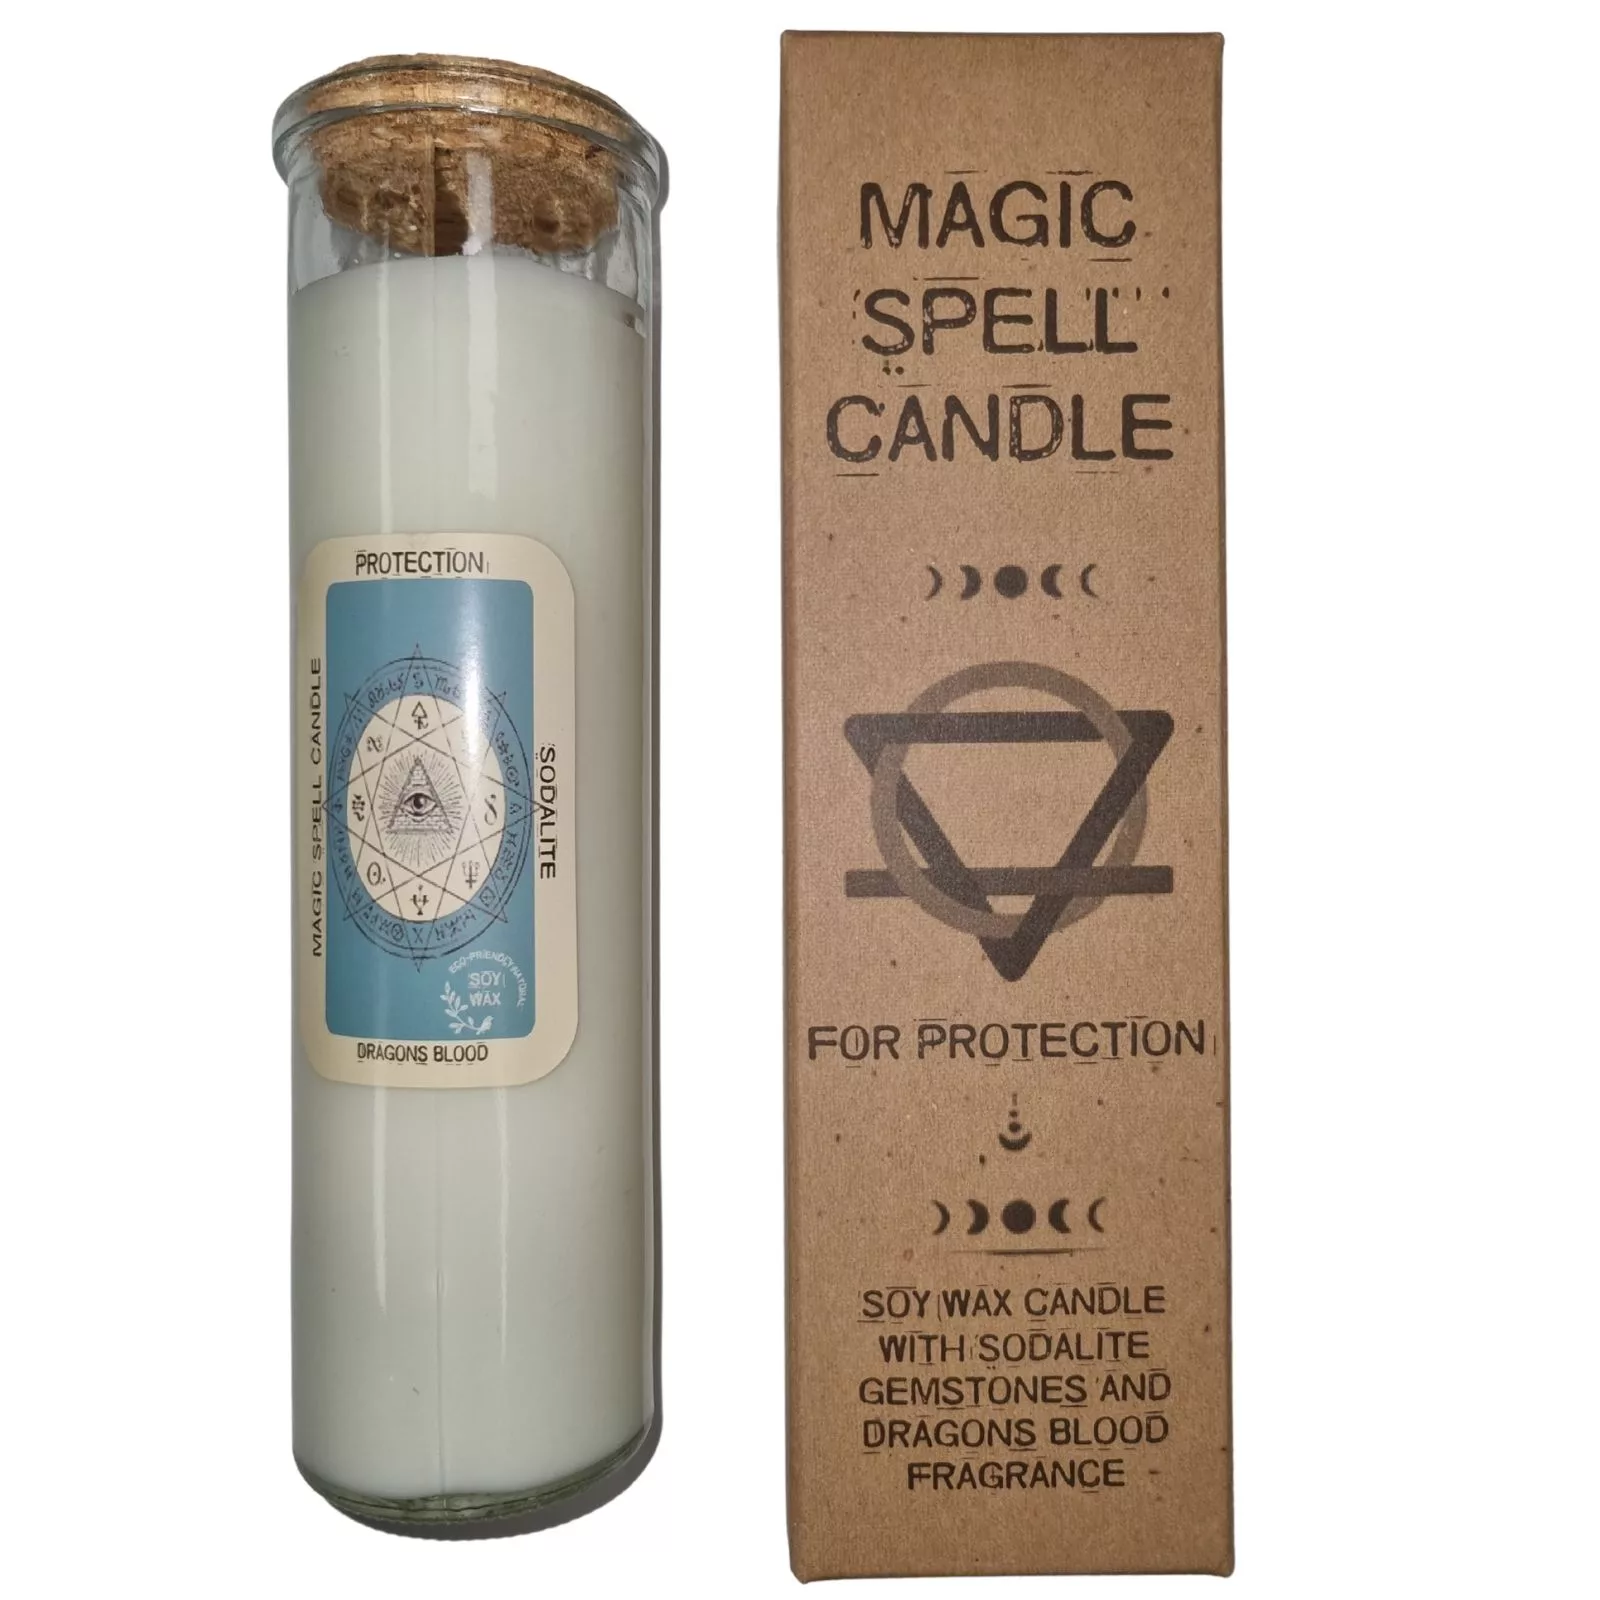 Magic Spell Candle – Protection